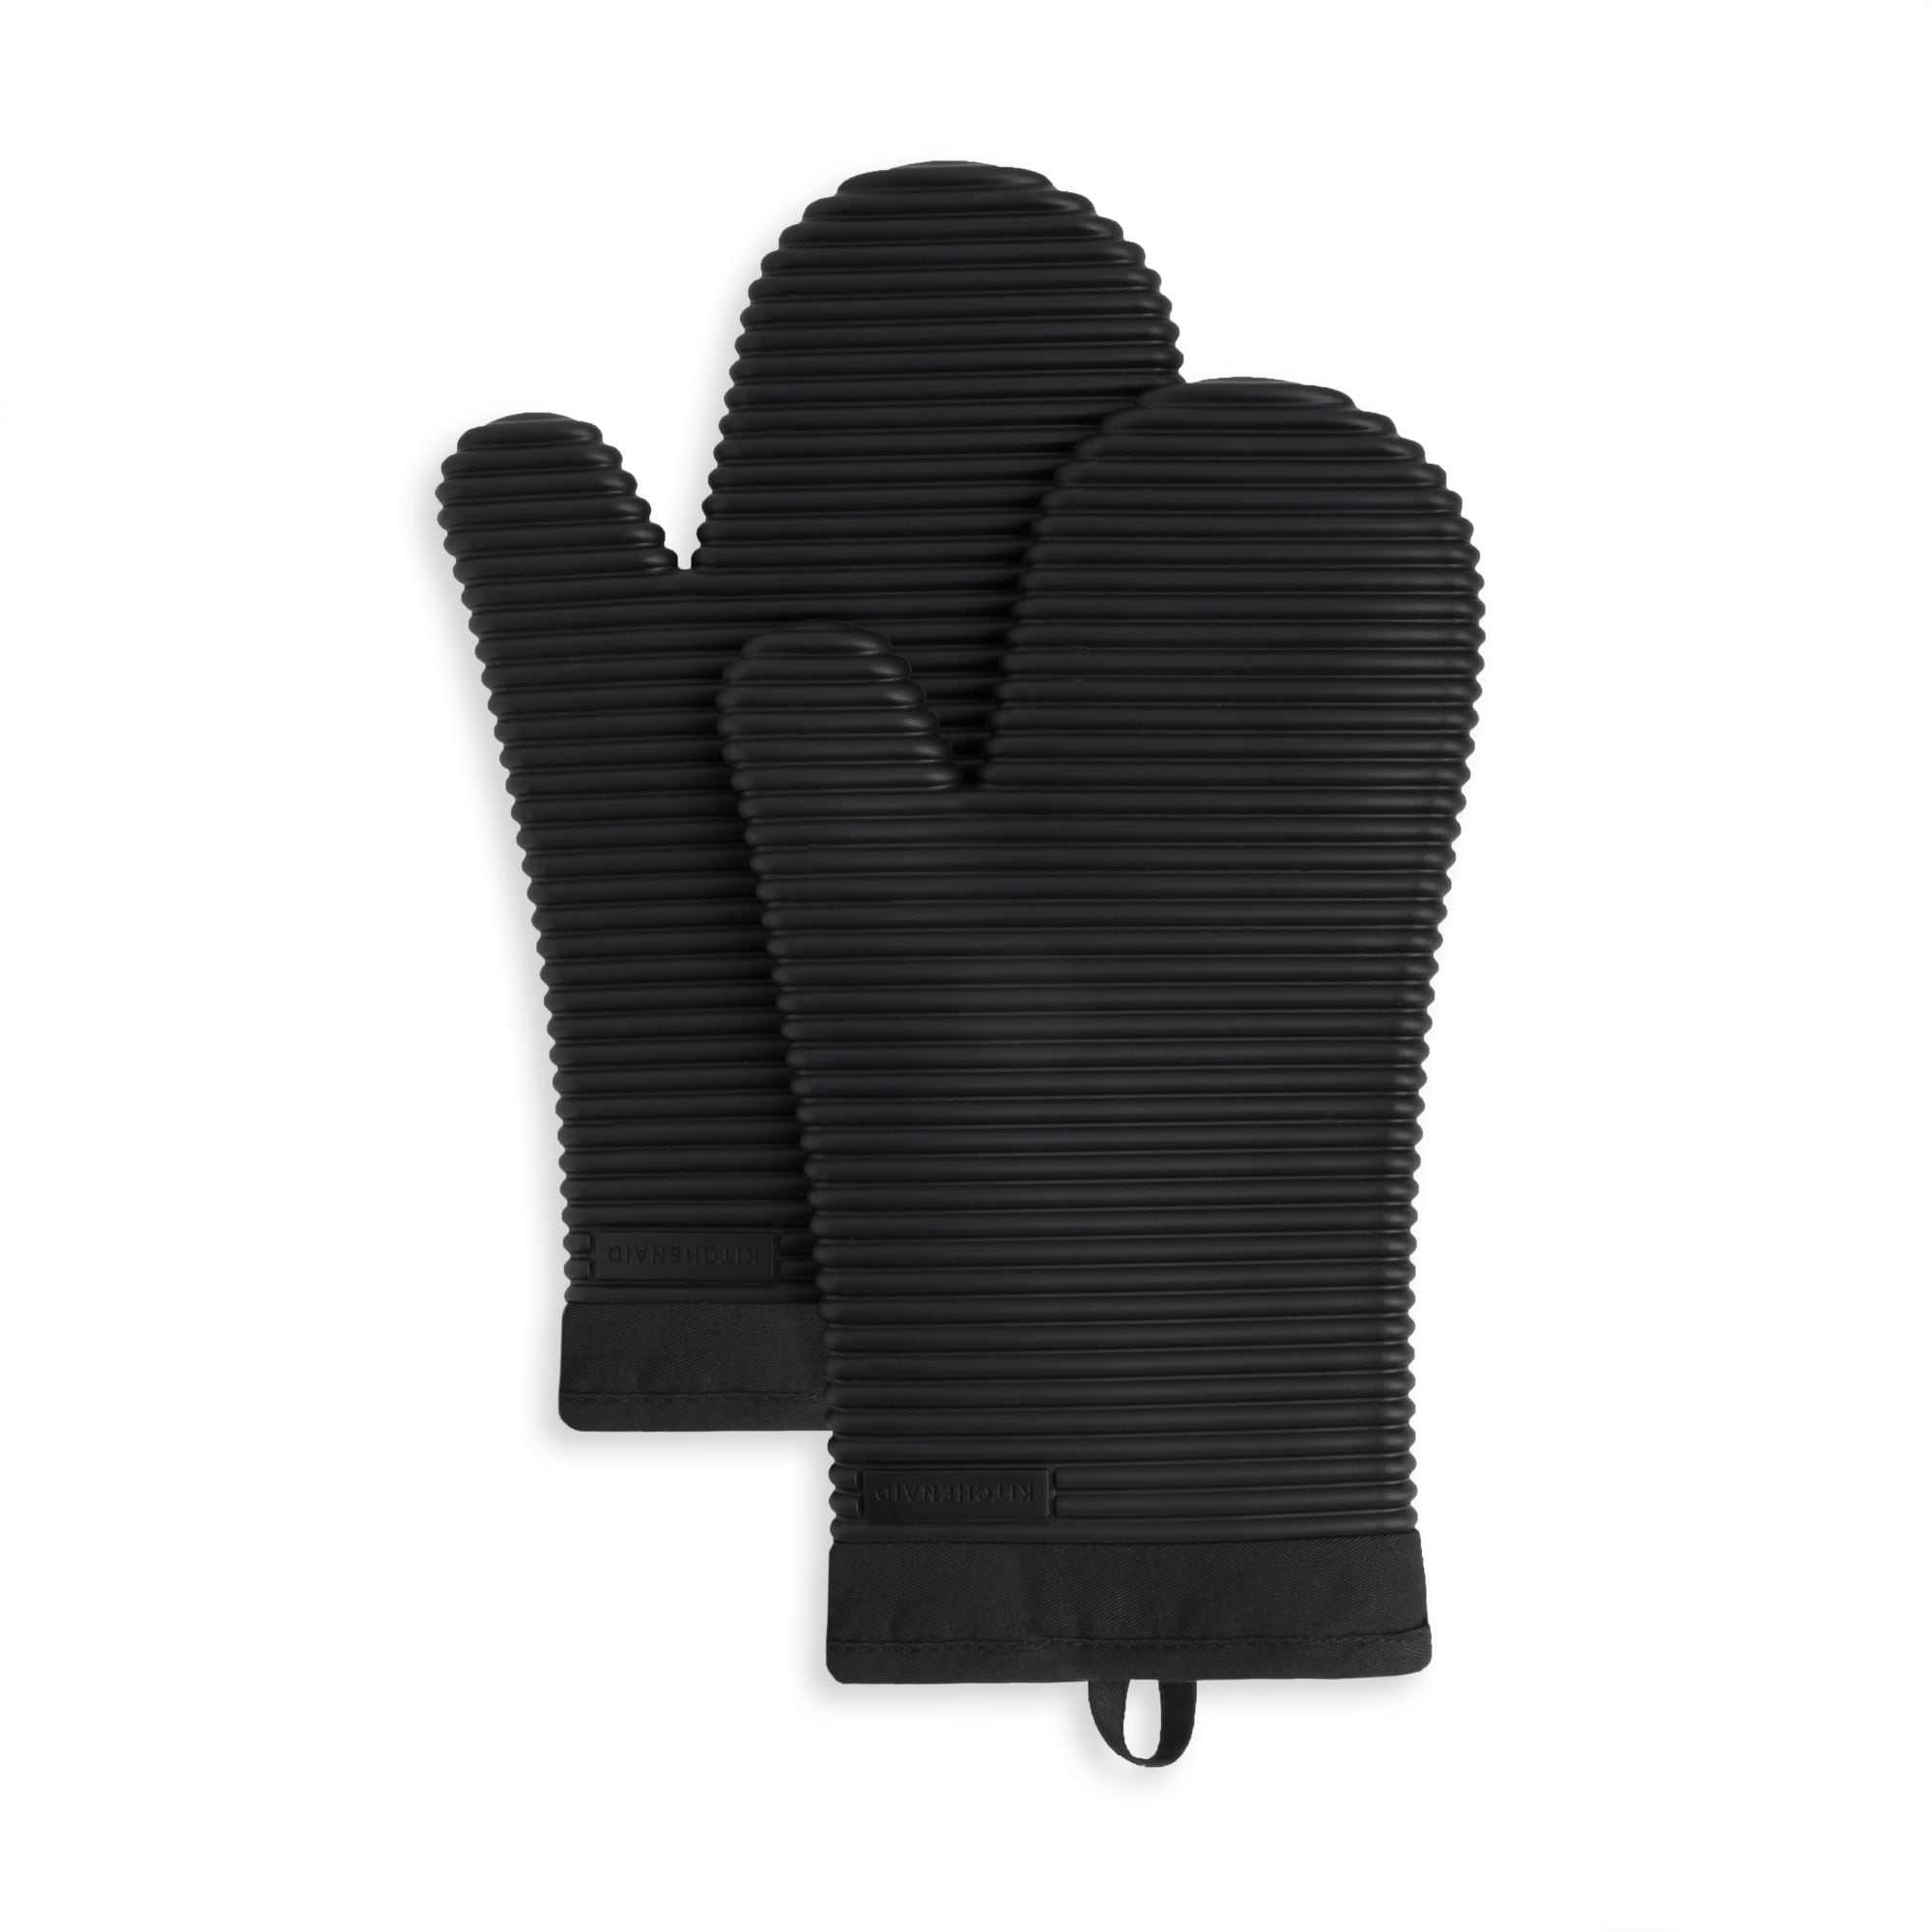 Gorilla Grip Silicone Oven Mitts Set and Magnetic Knife Strip, Mitts are in  Black Color, Heat Resistant, Stainless Steel Bar is 12 Inches, 2 Item